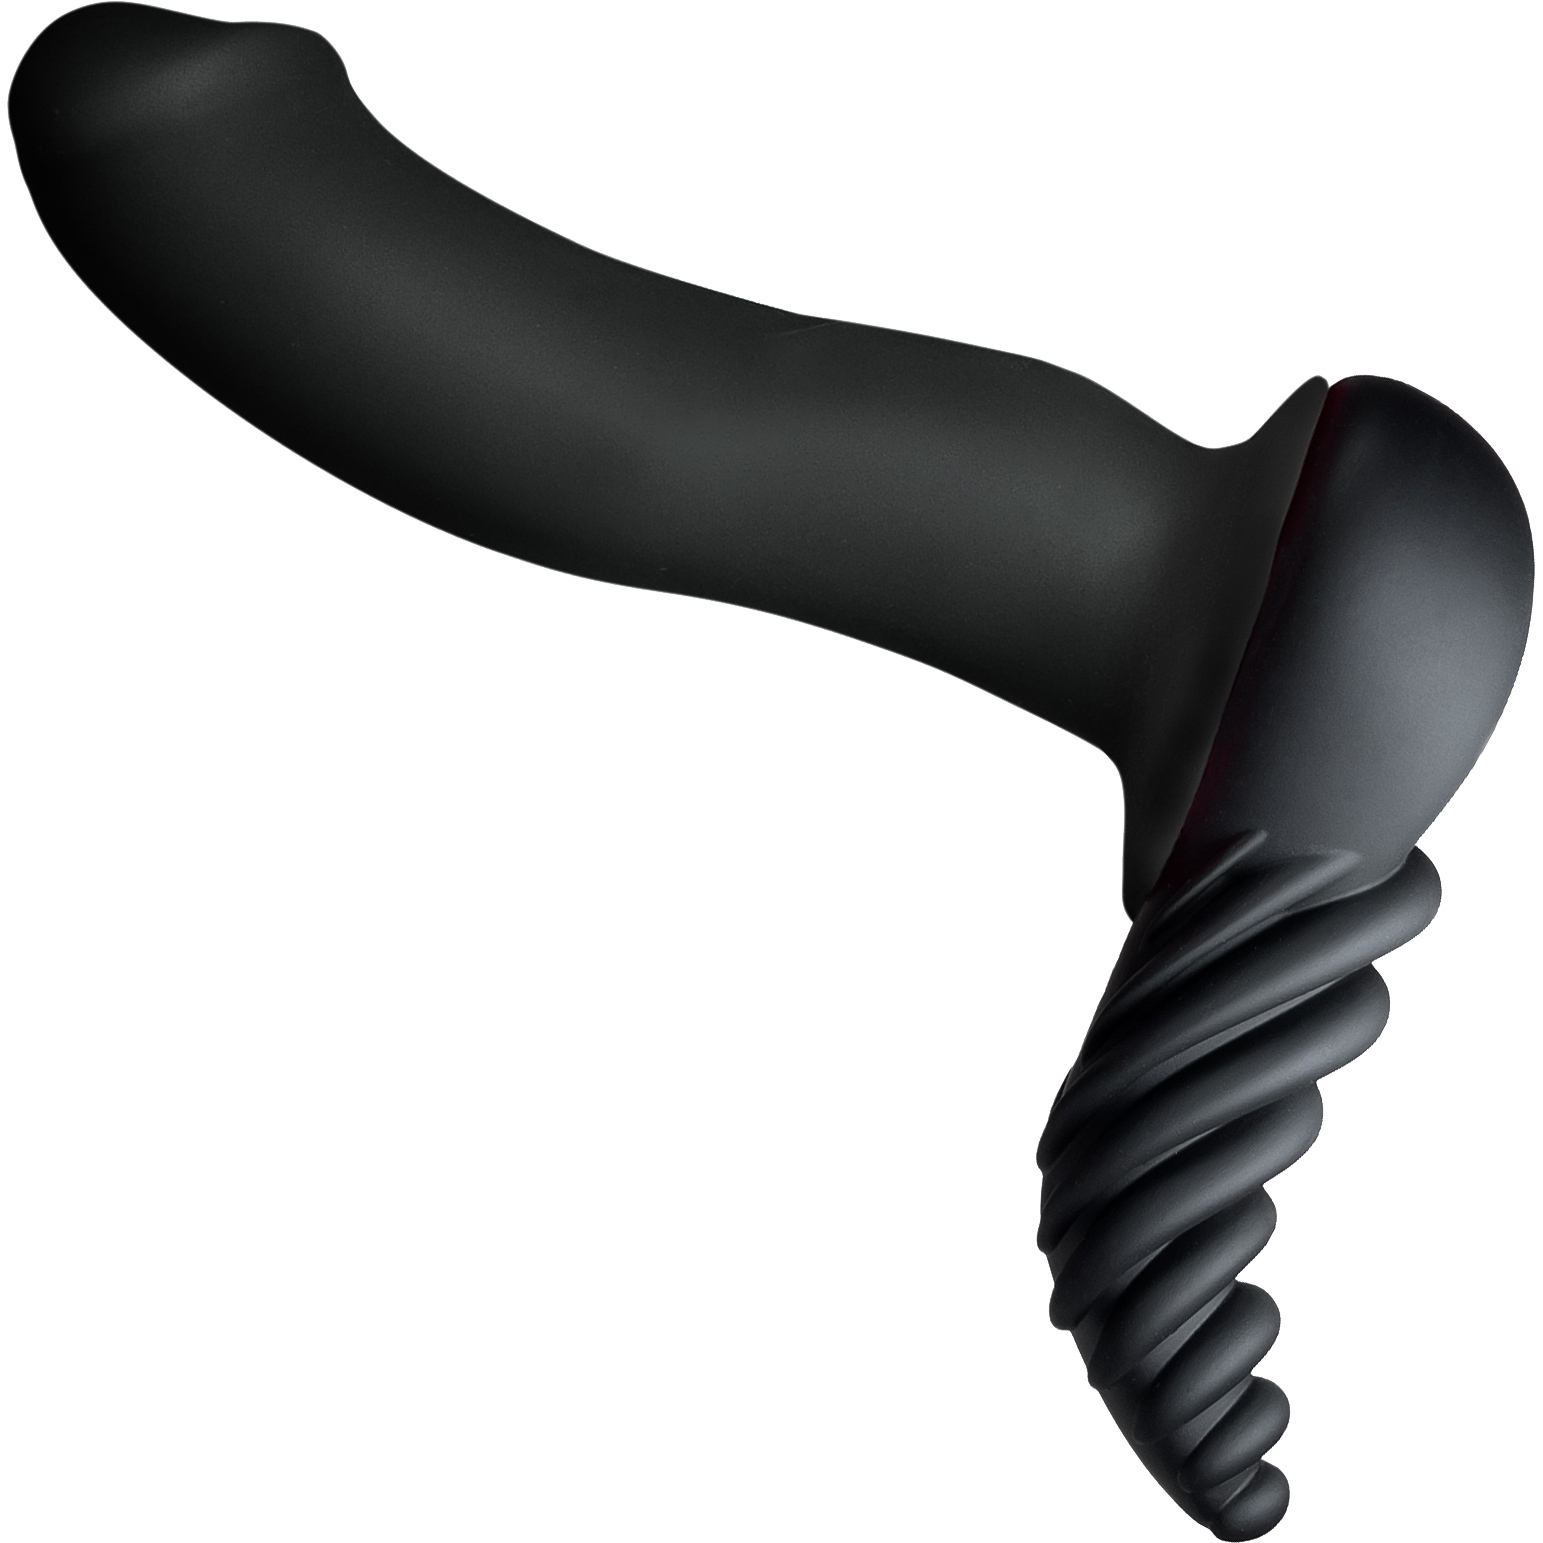 Luvgrind Soft Silicone Grinder, Stroker & Dildo Base Stimulation Cushion By Banana Pants - With Dildo (not included)